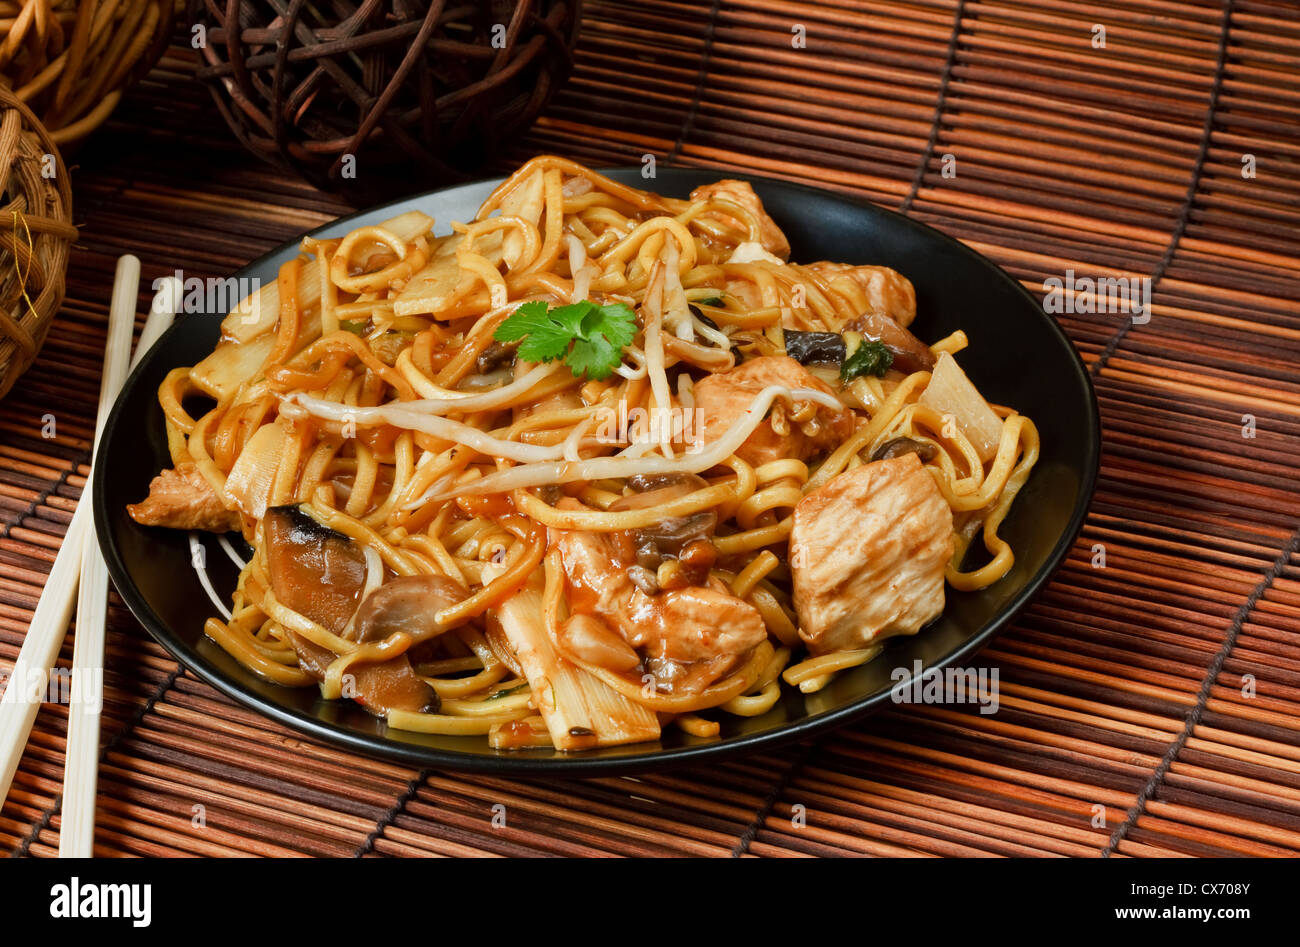 Chicken chow mein a popular chinese food available at take aways Stock Photo